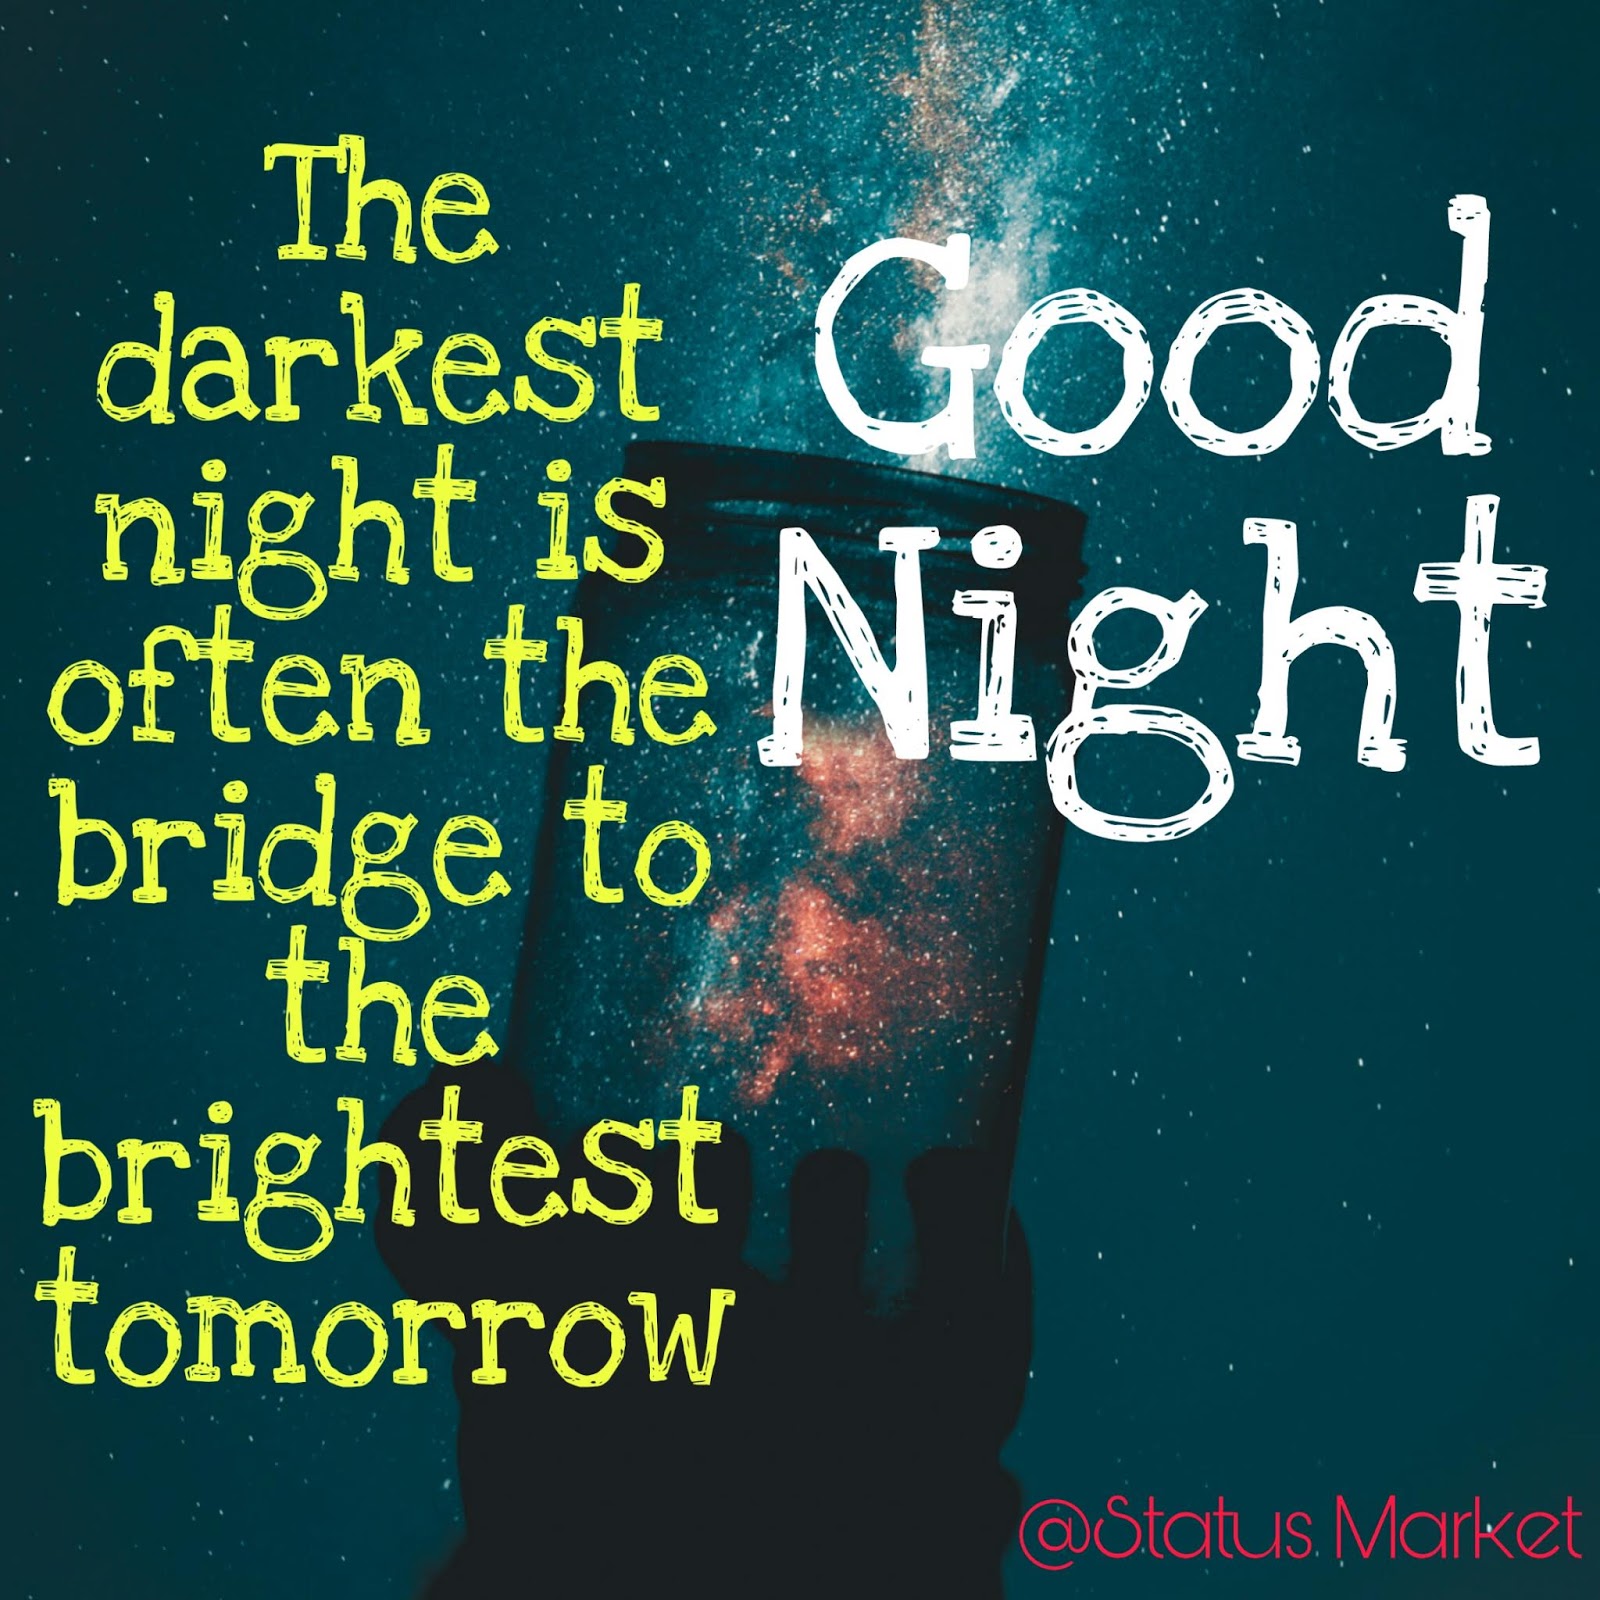 20+ Good Night Images For Whatsapp Free Download | Status Market